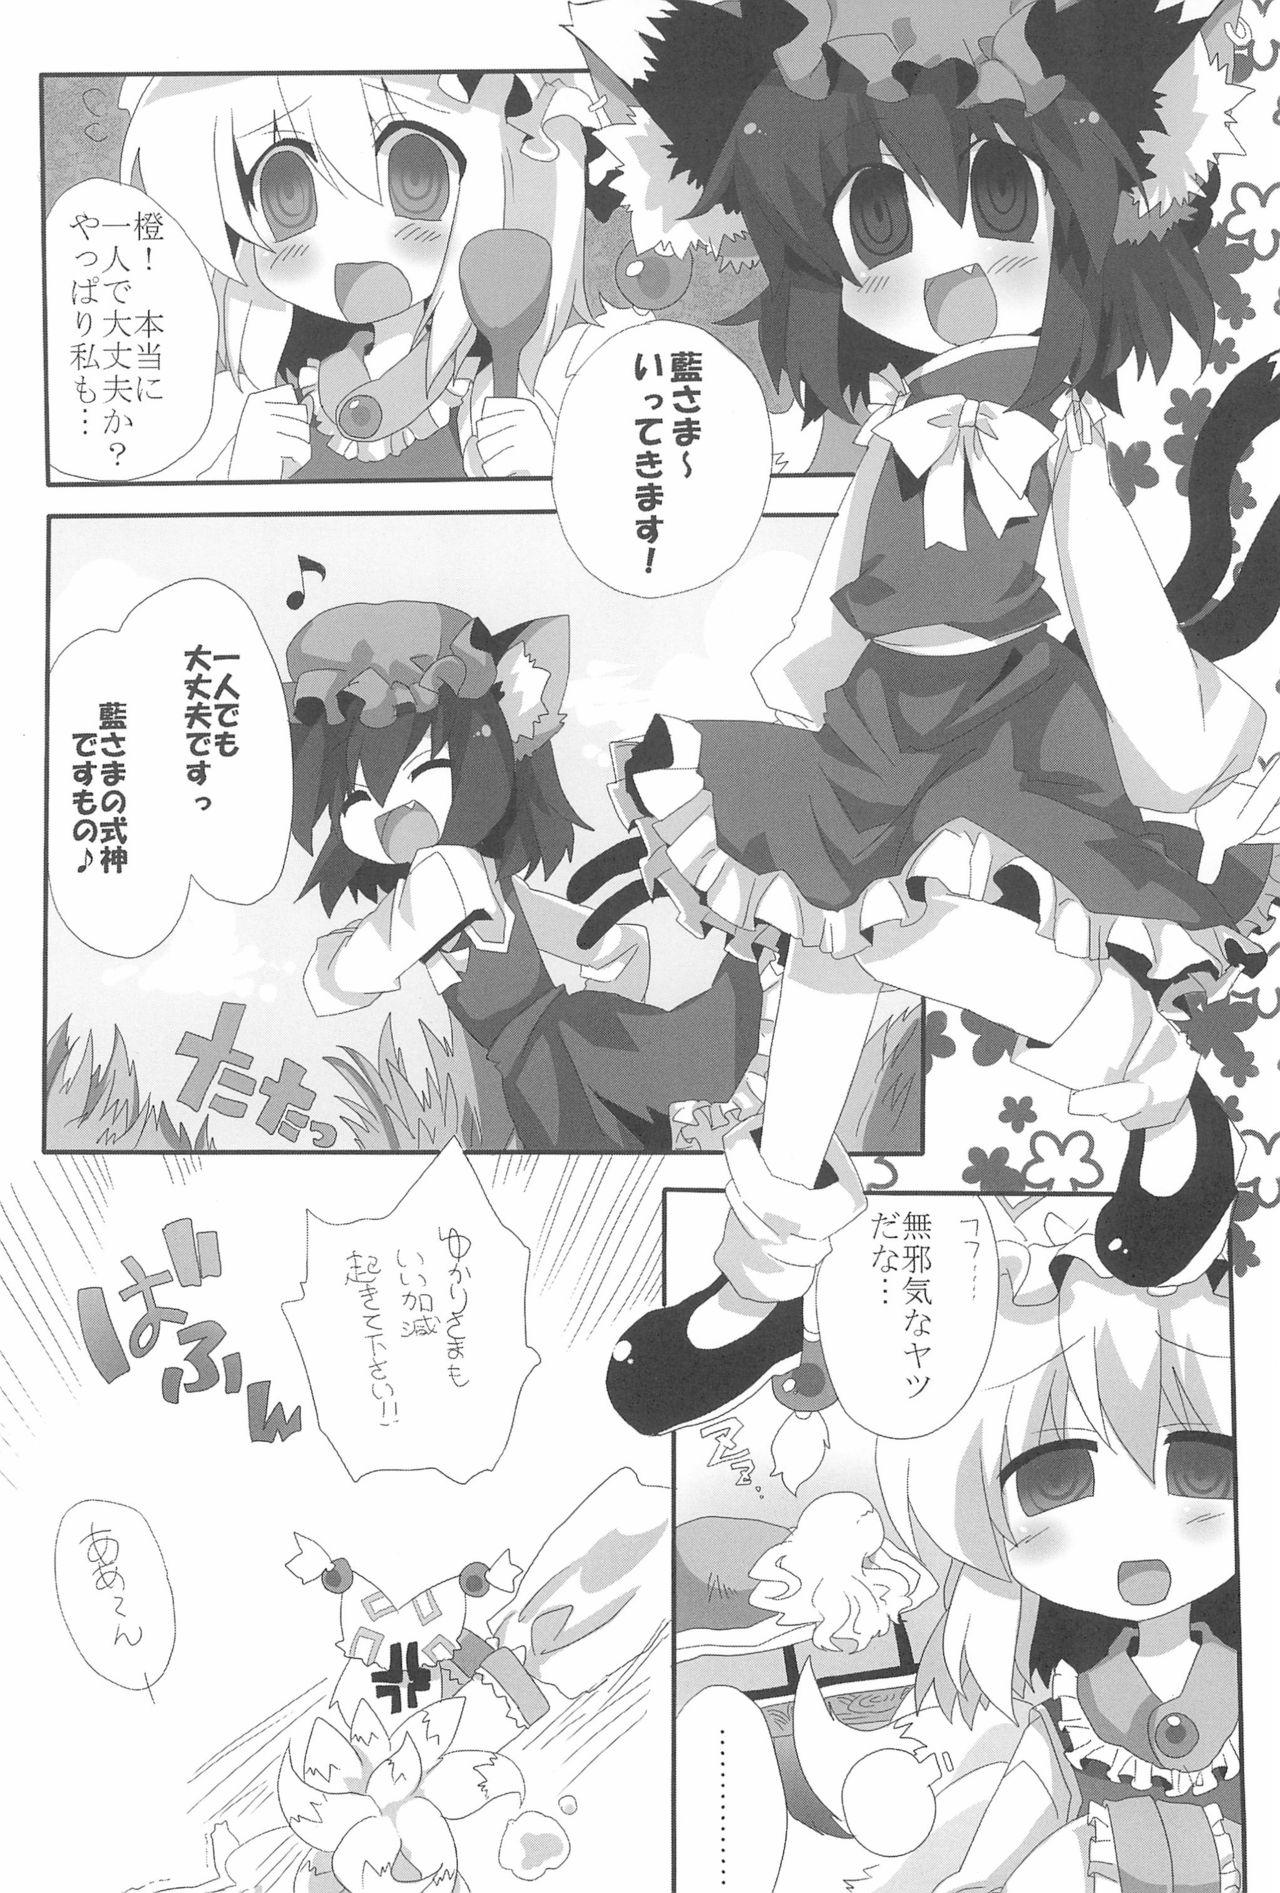 Squirt NYAS! ATTRACTION - Touhou project Fit - Page 4